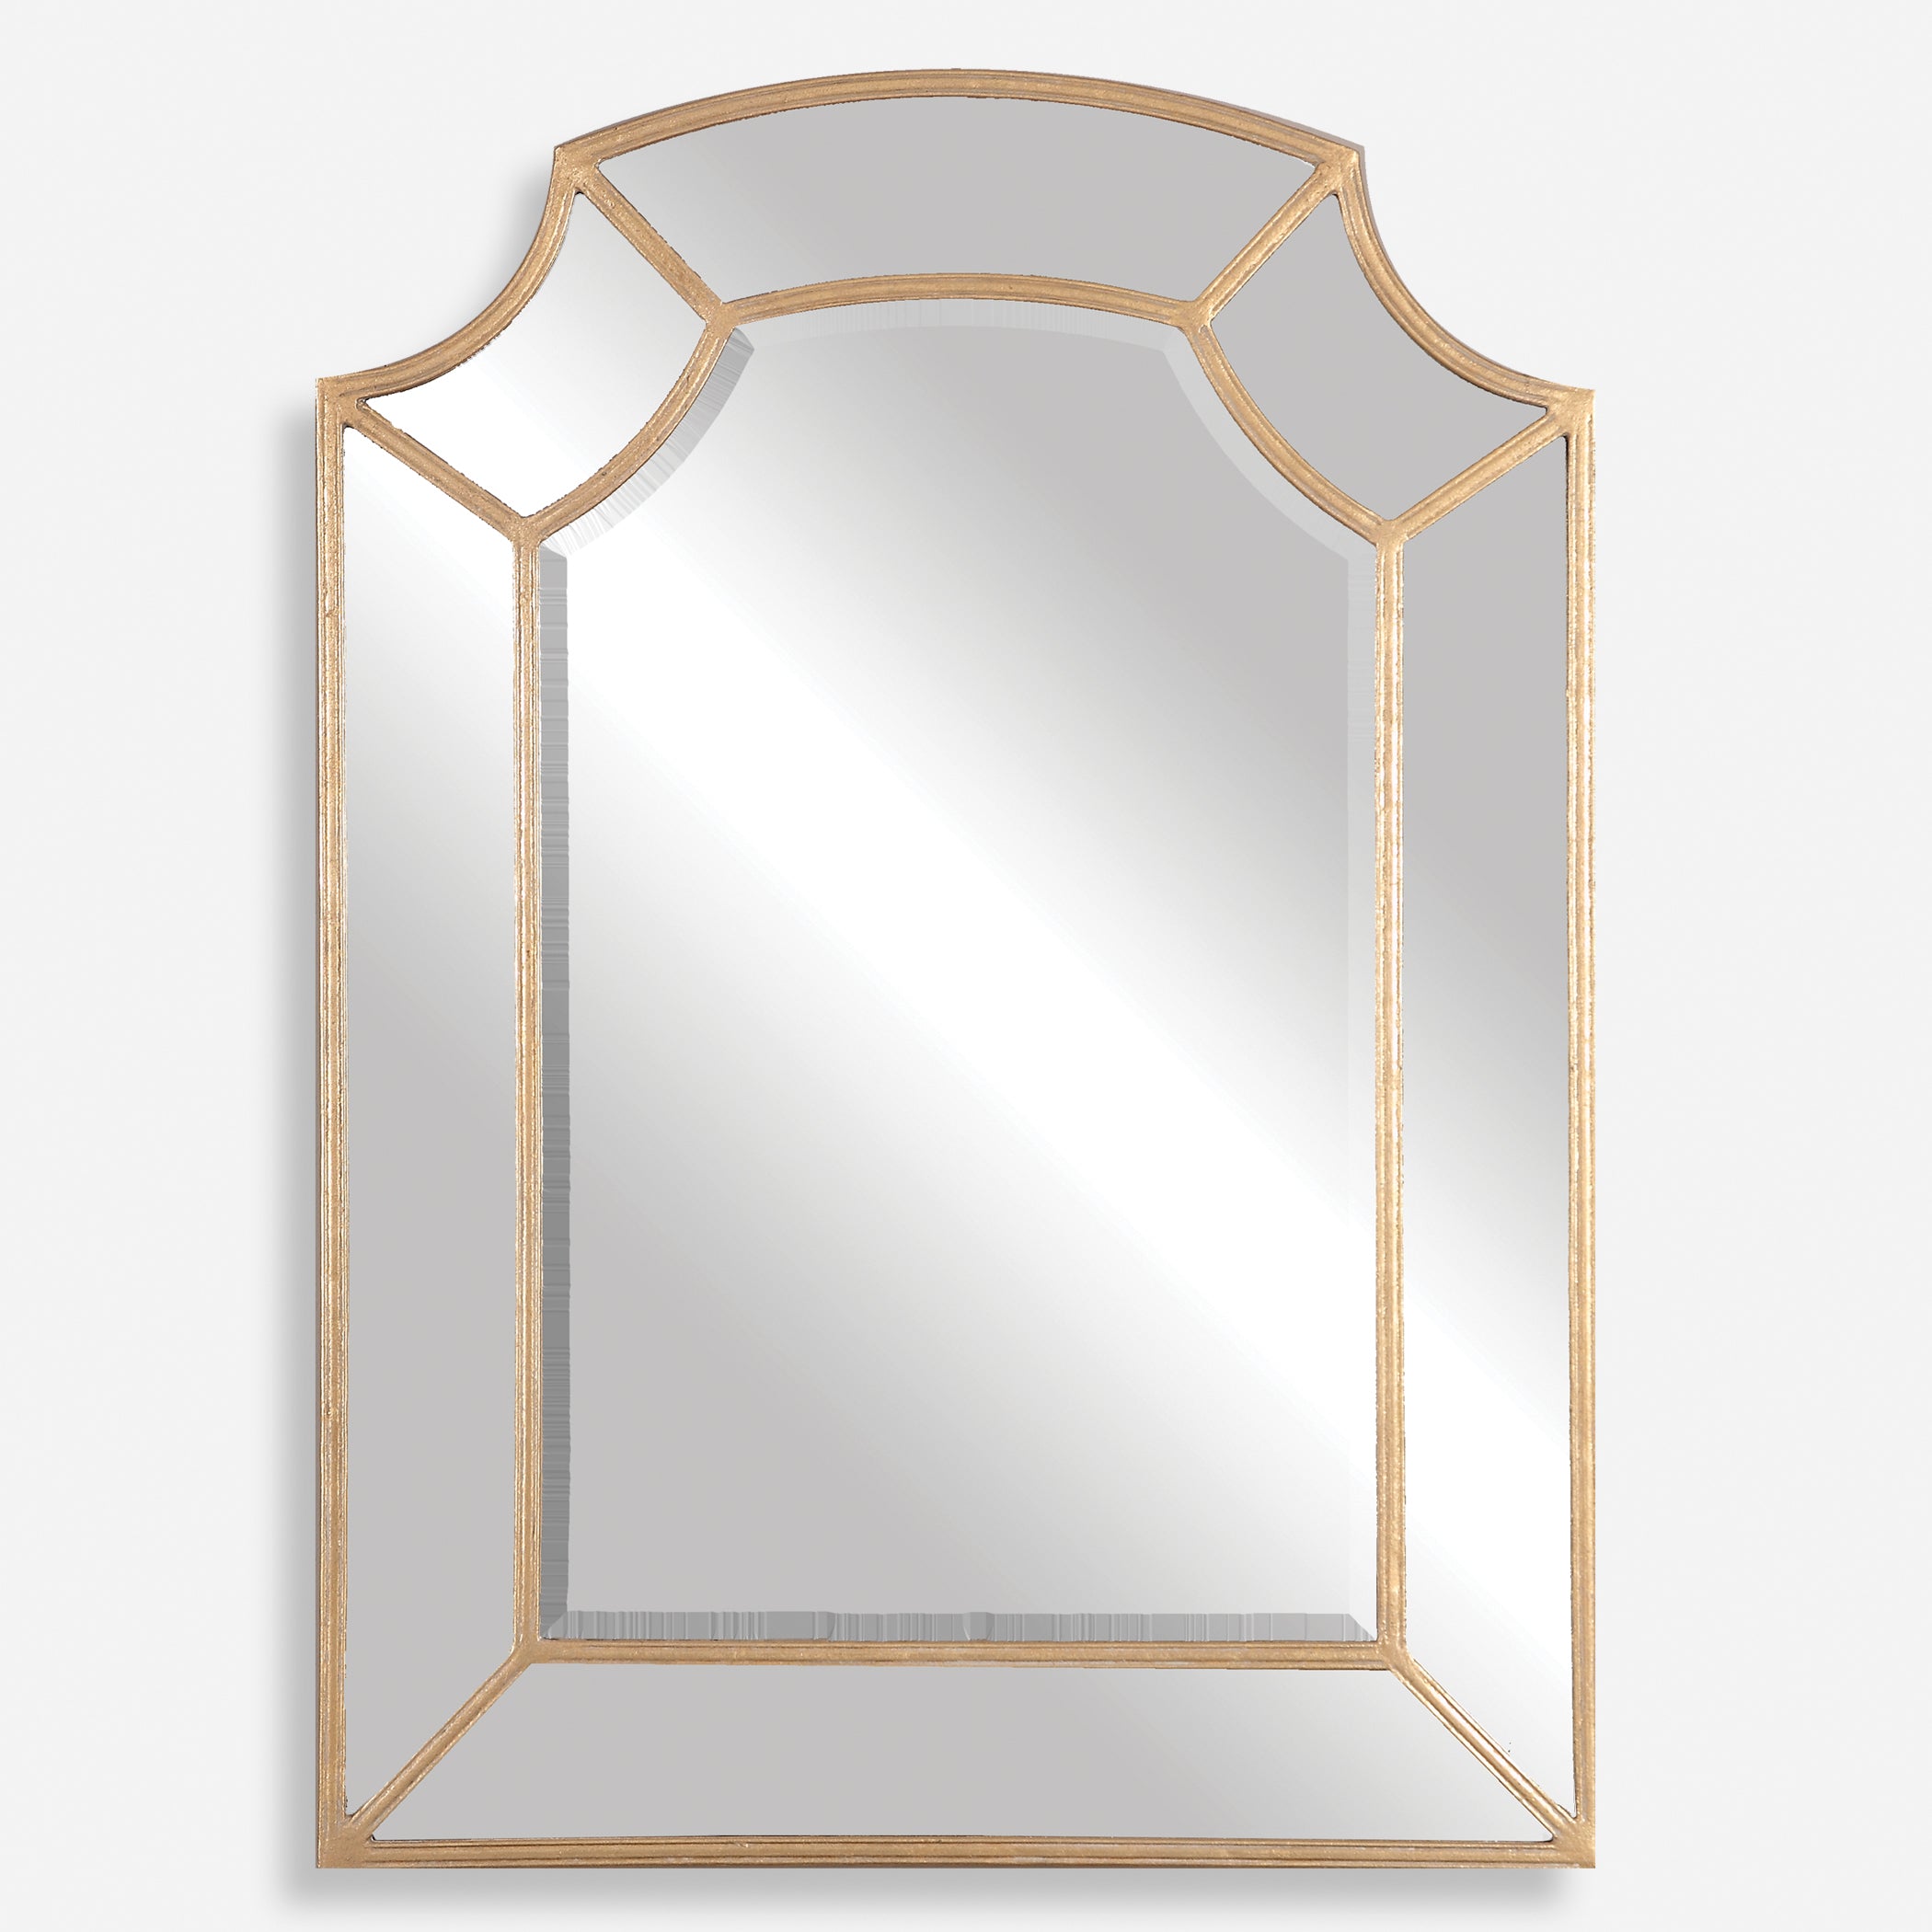 Uttermost Francoli Gold Metal Arch Mirrors Gold Metal Arch Mirrors Uttermost   